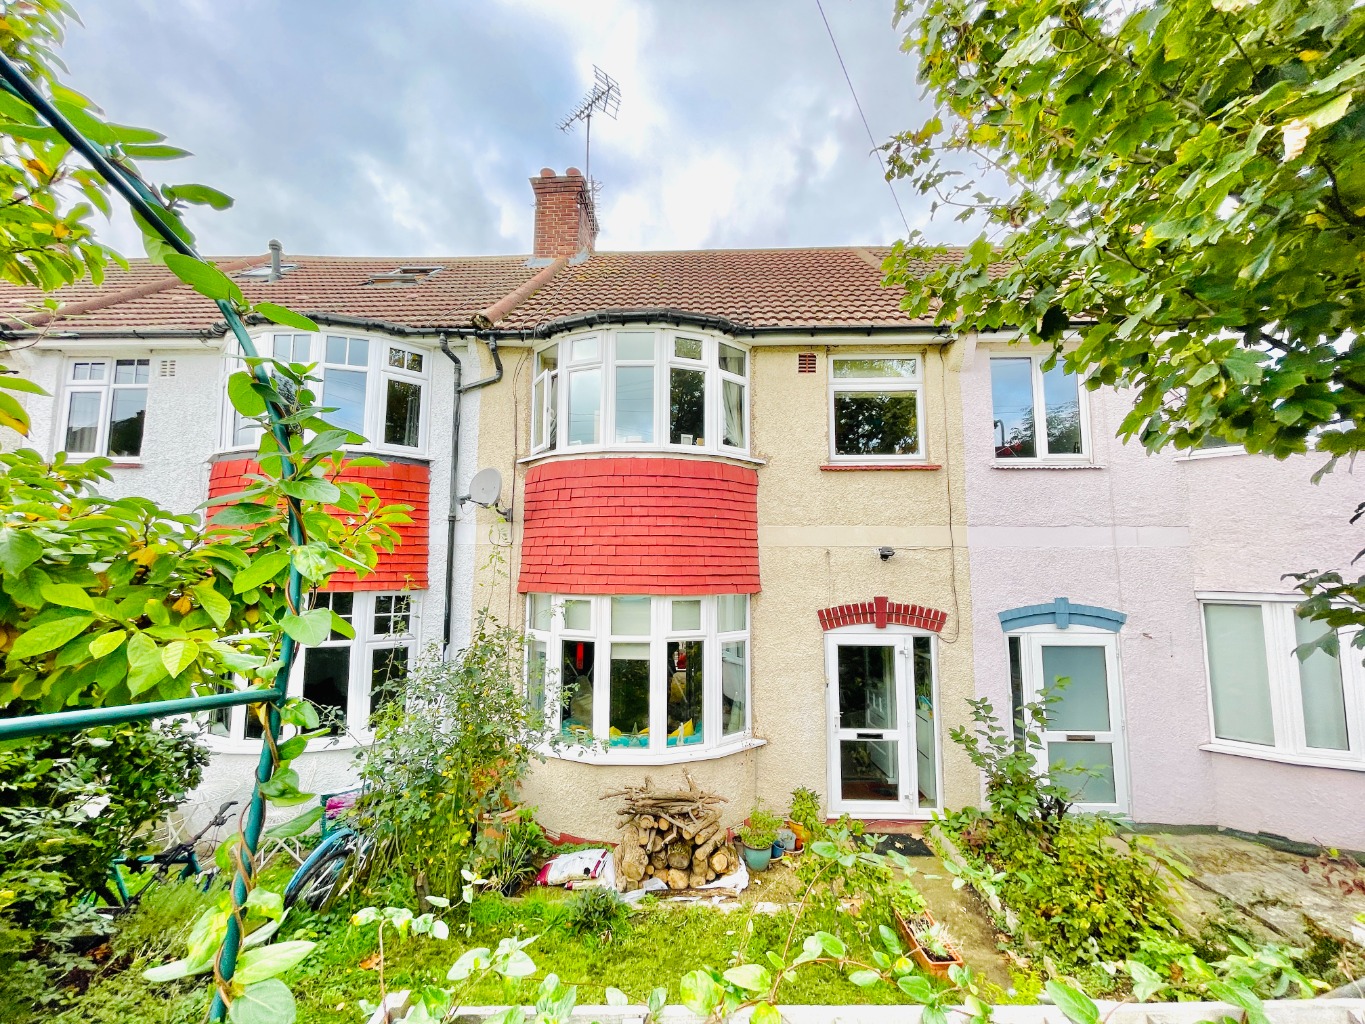 3 bed terraced house for sale in Moordown, London - Property Image 1